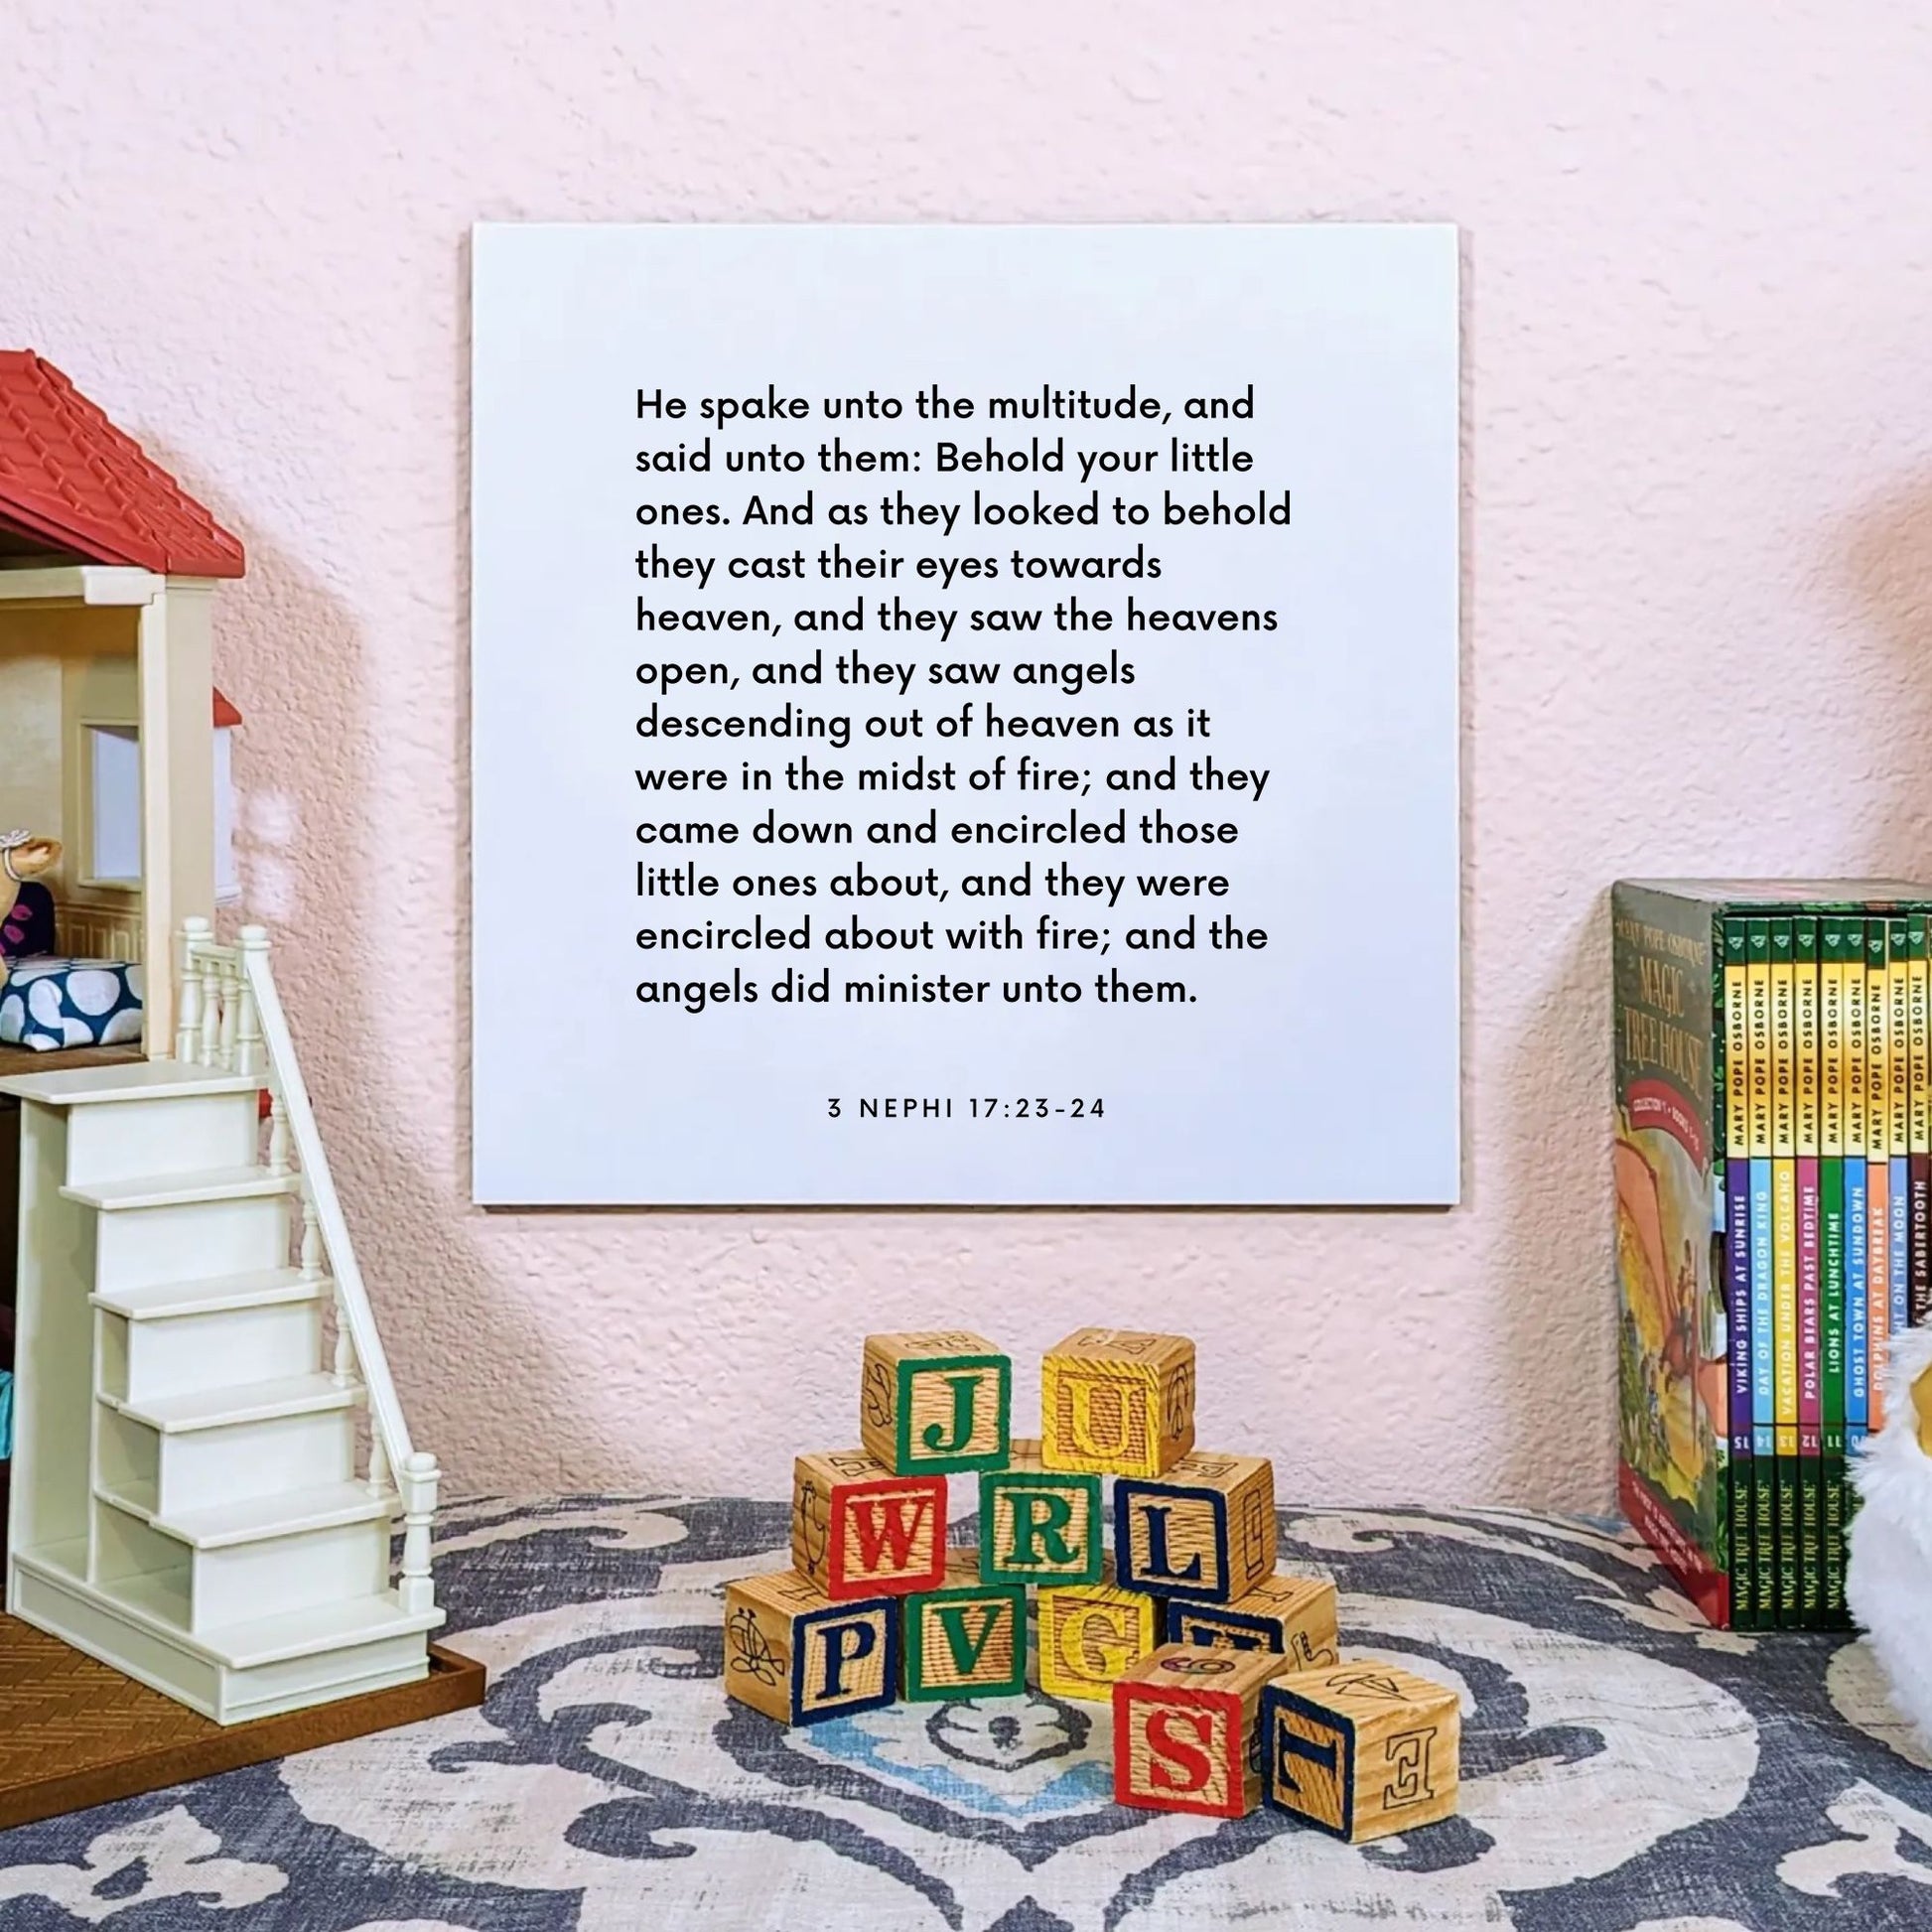 Playroom mouting of the scripture tile for 3 Nephi 17:23-24 - "Behold your little ones"